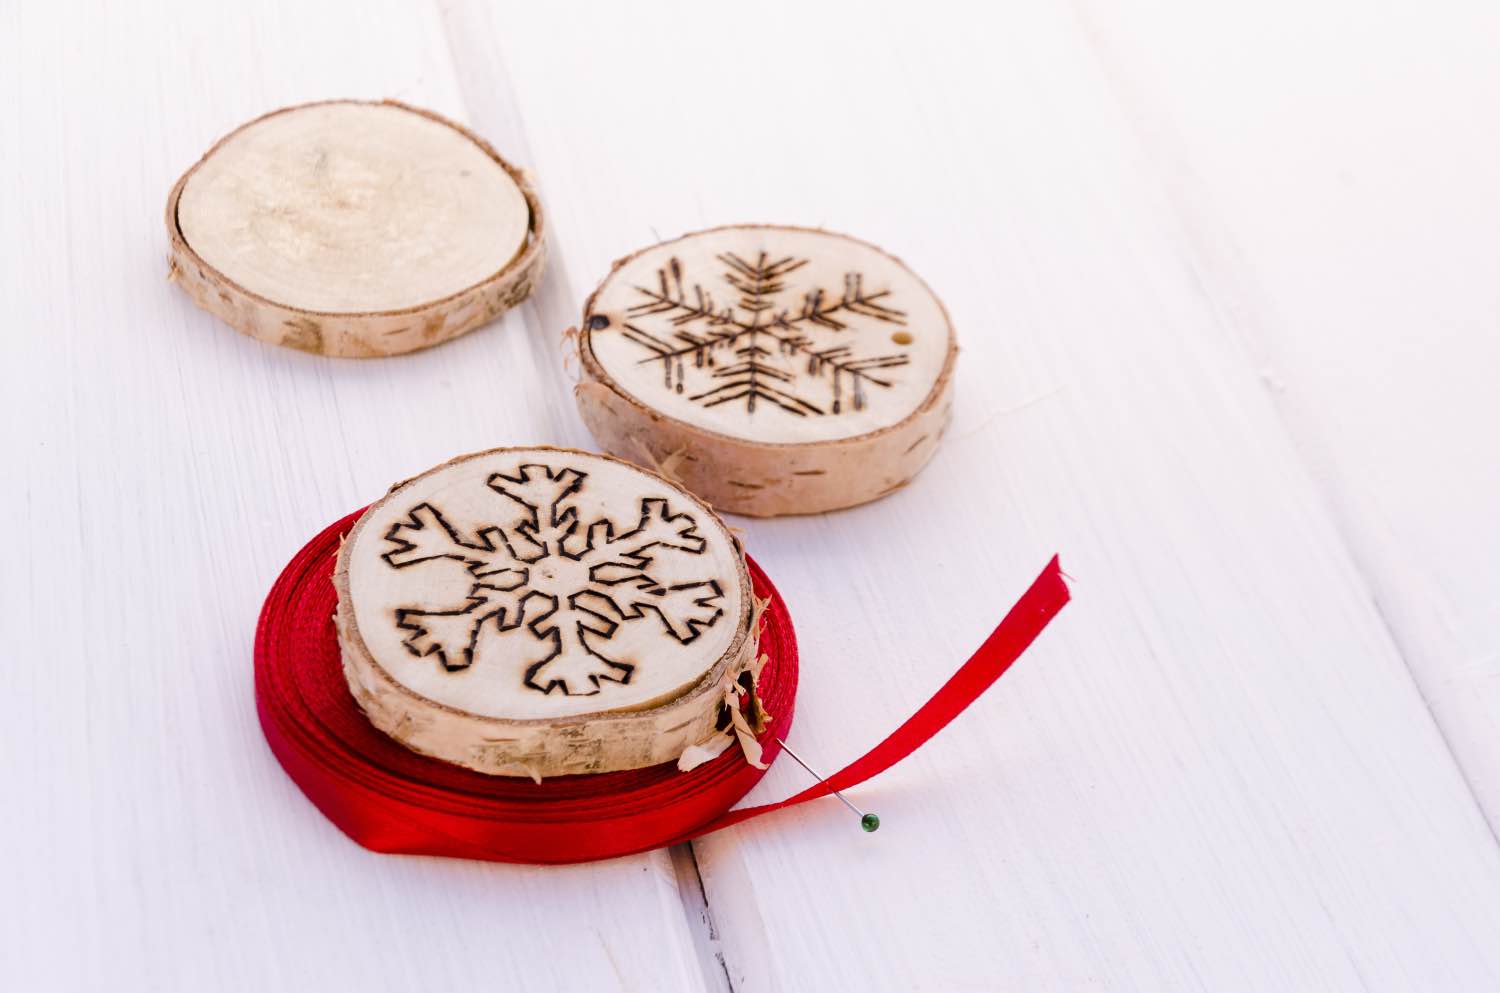 string wood burned ornaments with holiday ribbon pop shop america